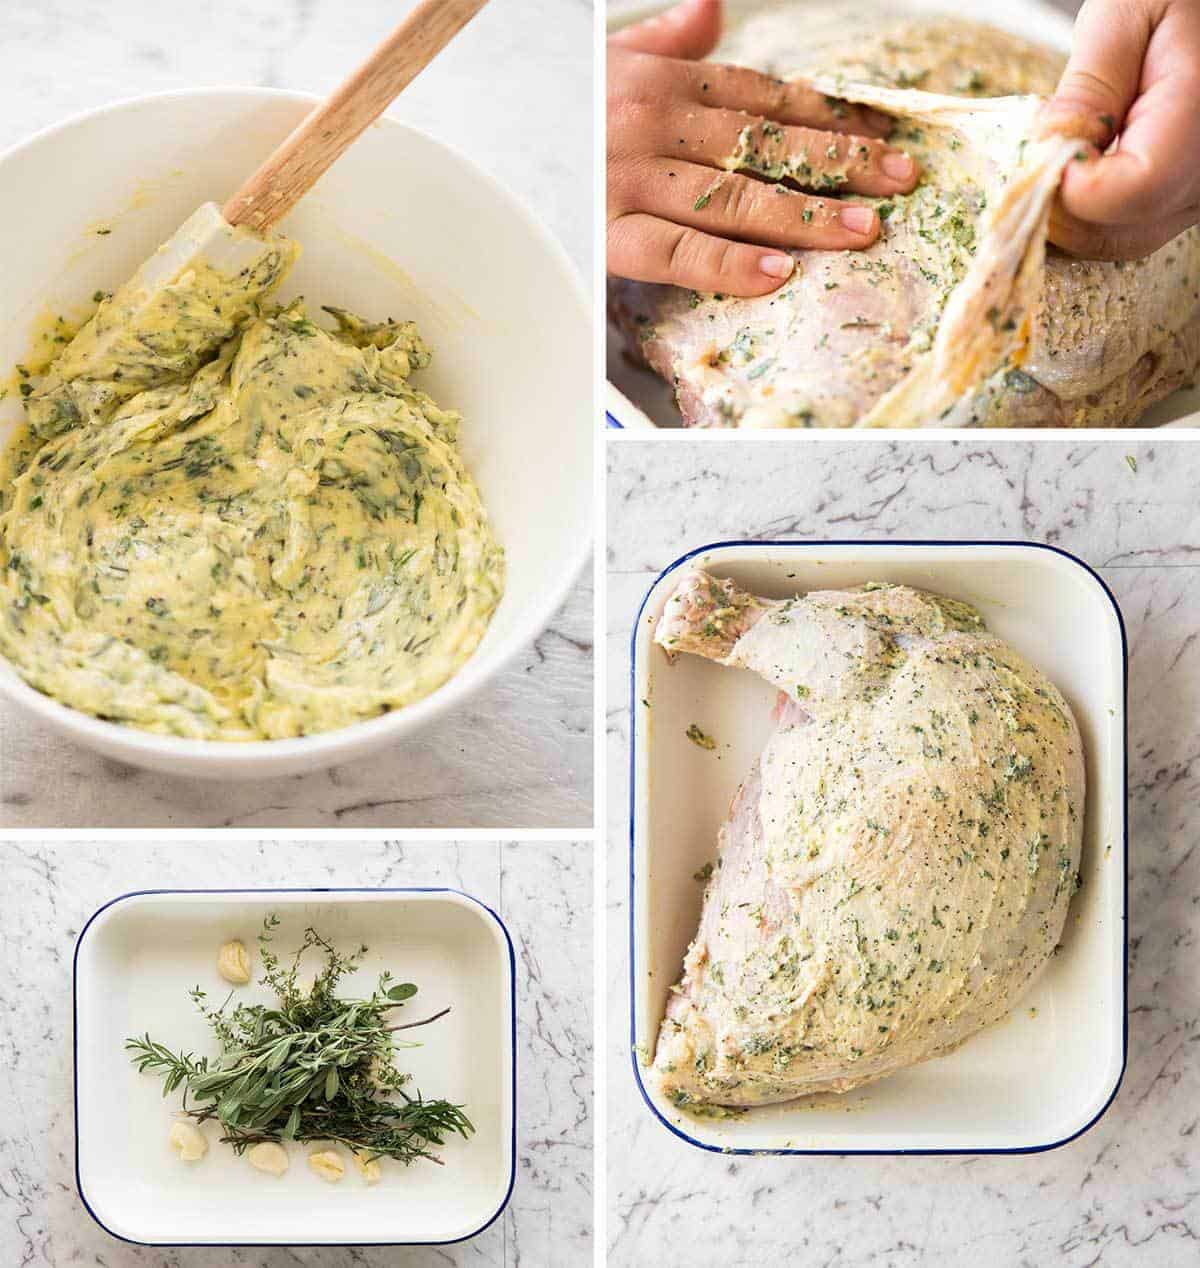 How to make turkey with herb butter under the skin (quick video tutorial provided) www.recipetineats.com